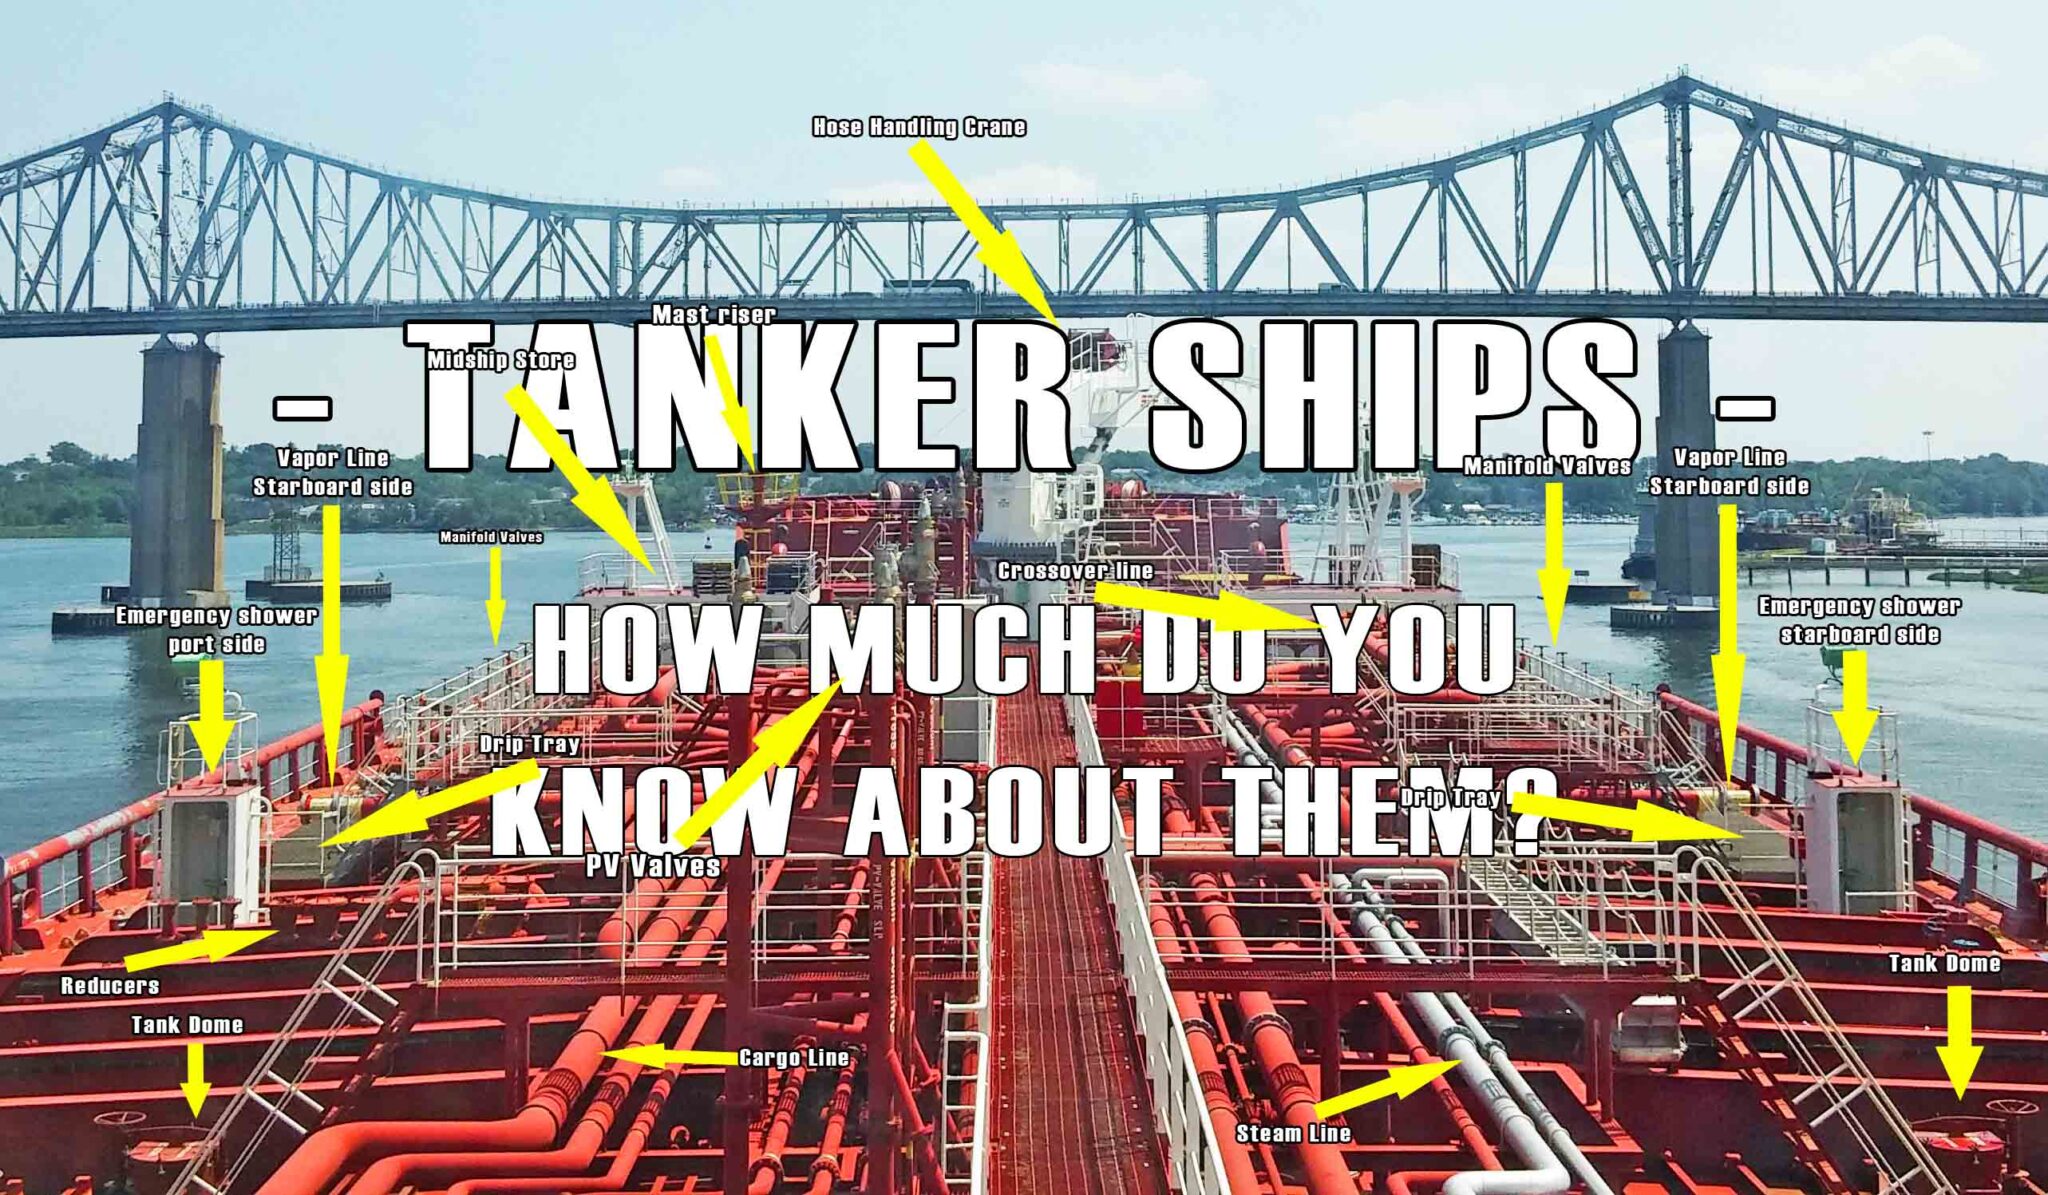 The main deck of a tanker ship and its parts are labeled while the vessel itself is passing under a bridge.